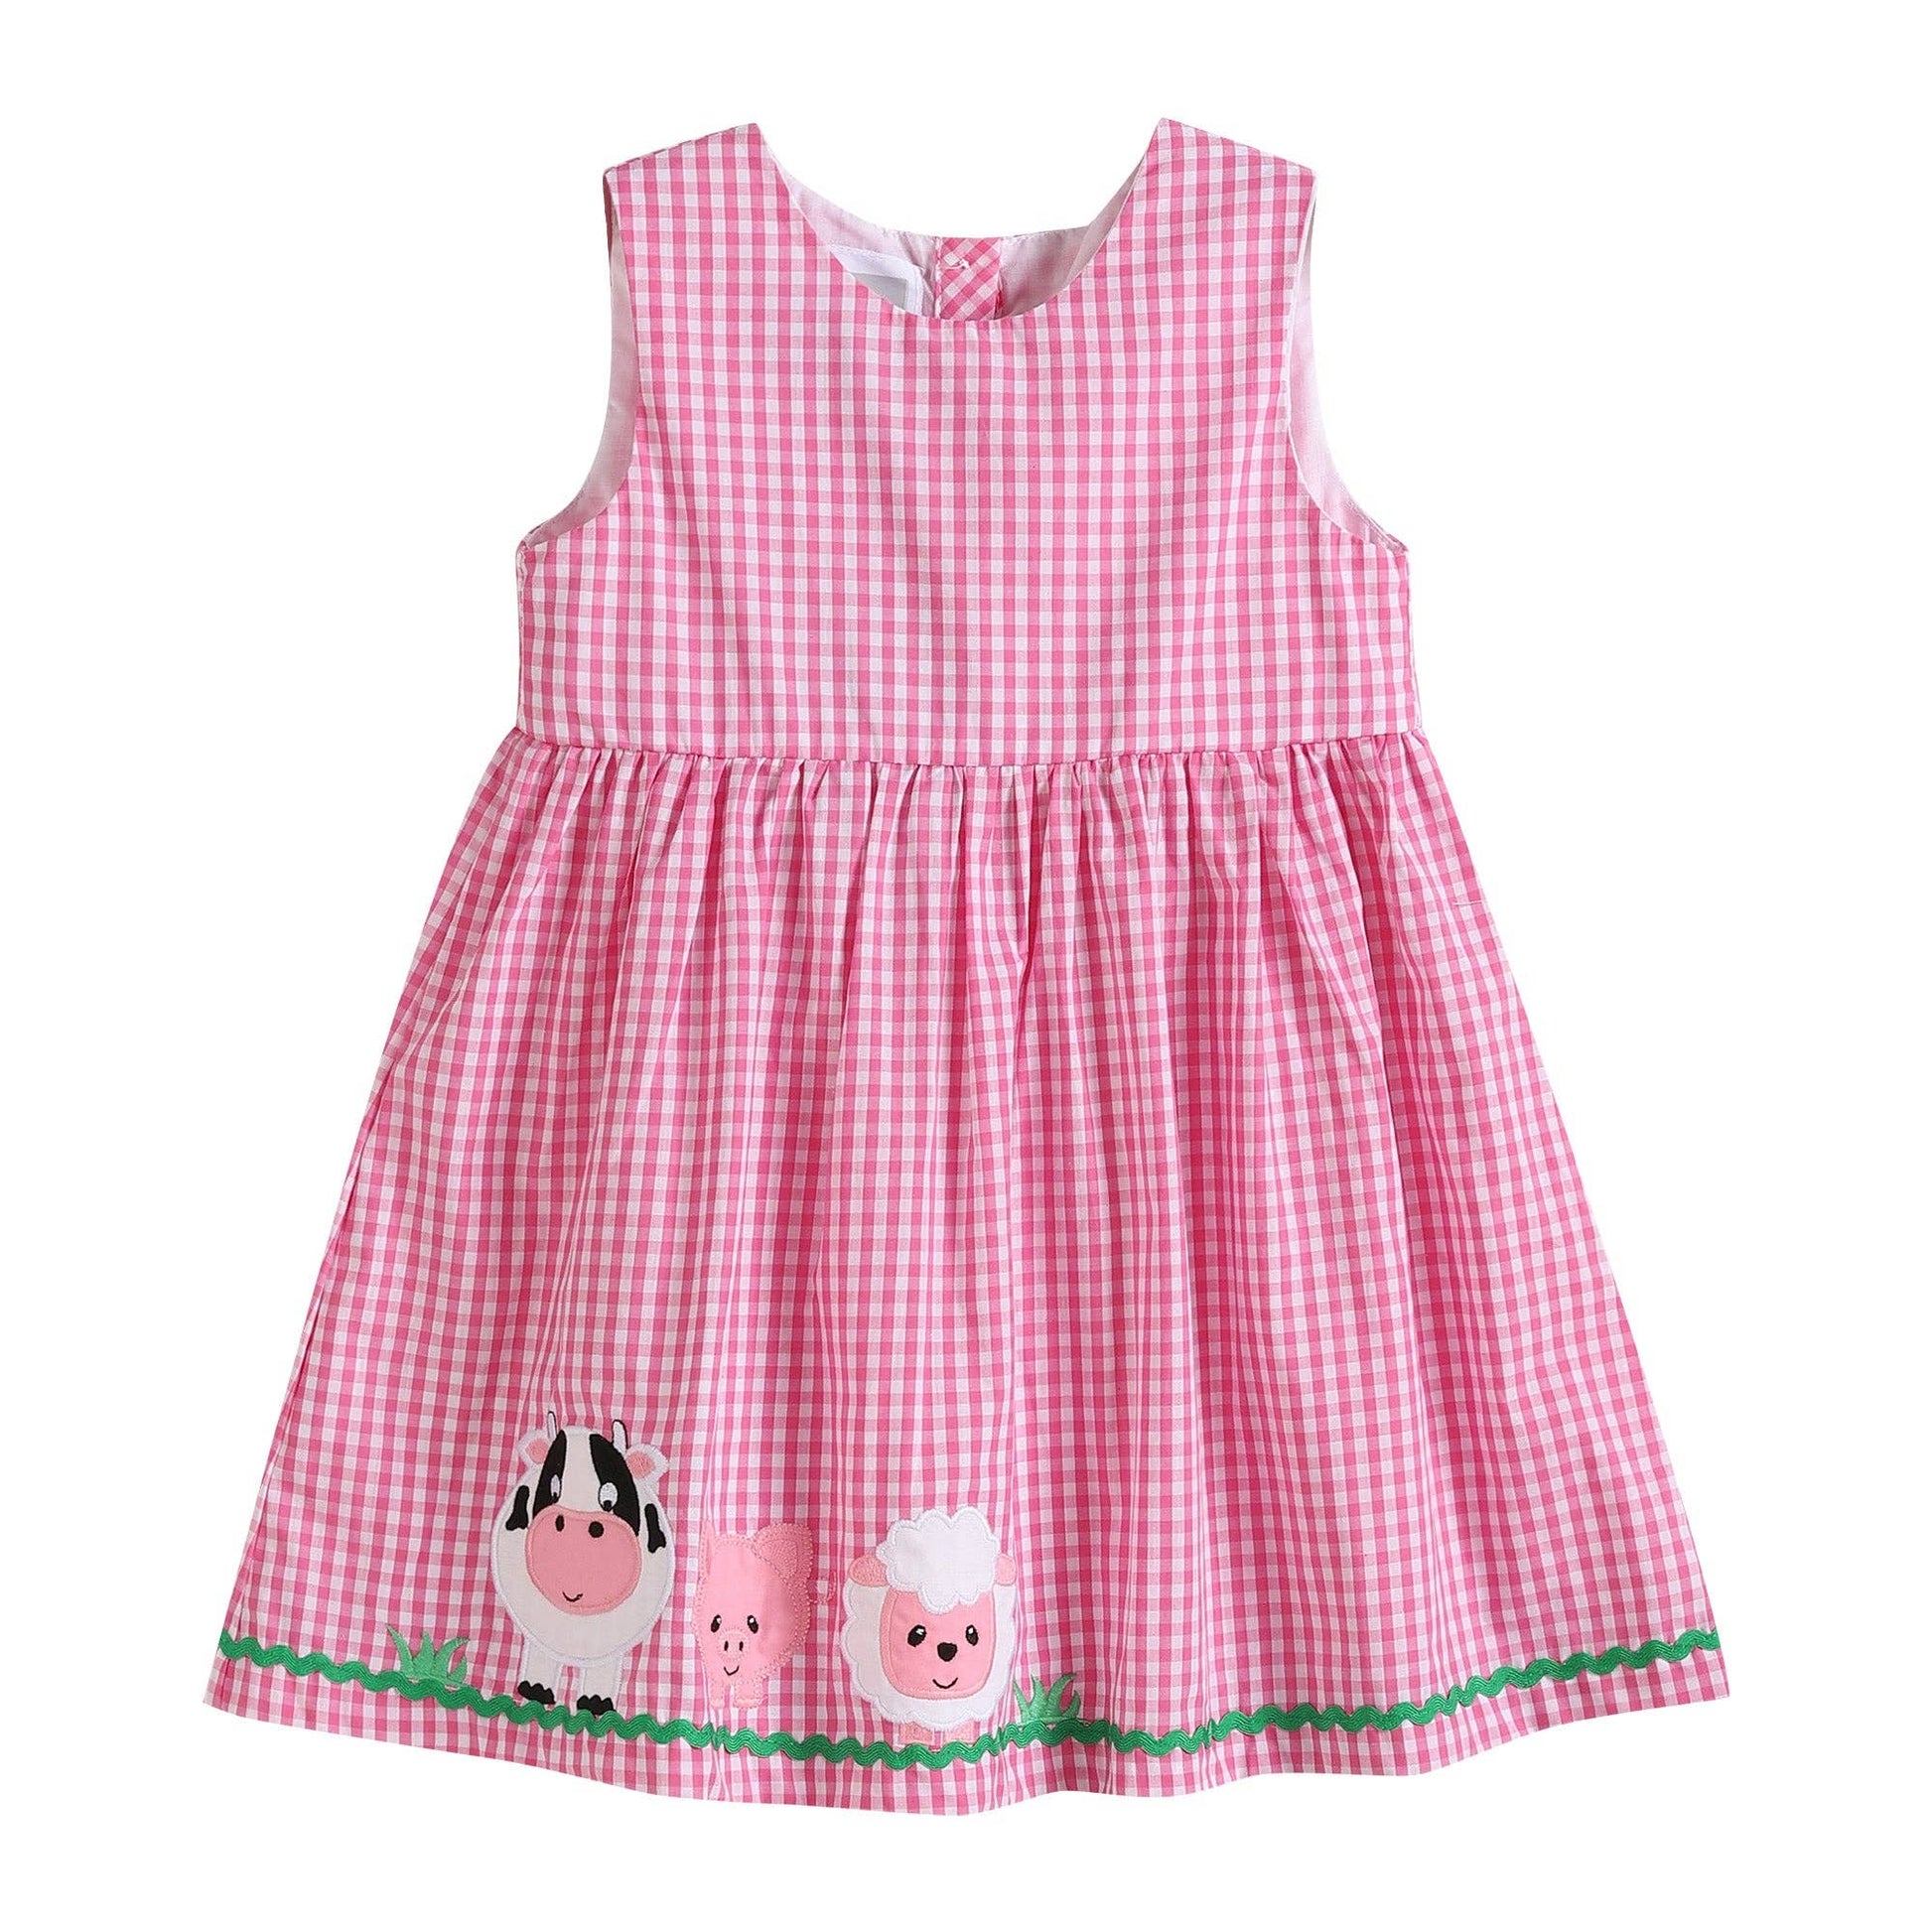 A Lil Cactus Pink Gingham Farm Animals Baby Dress.